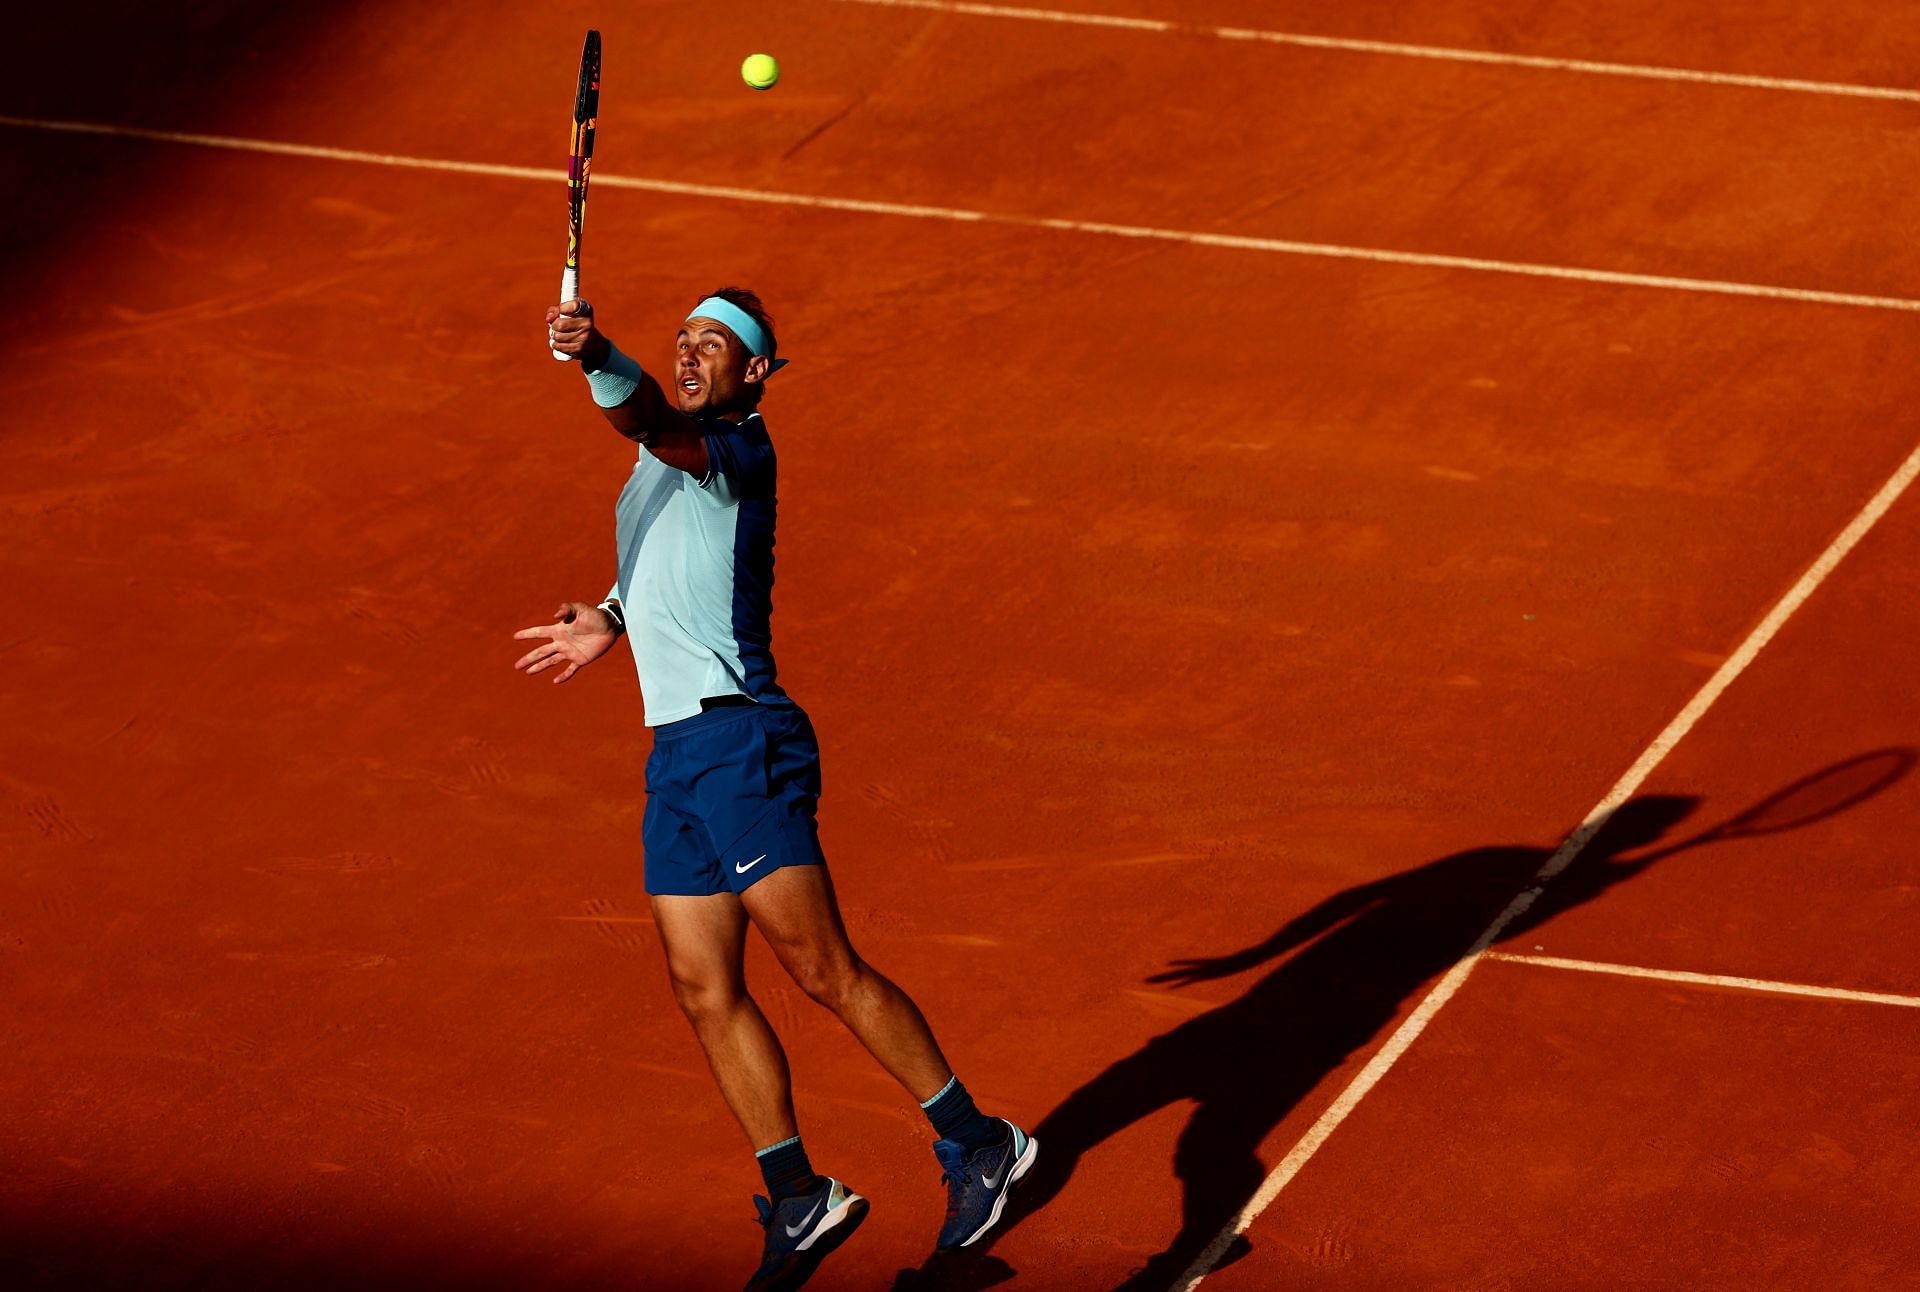 Rafael Nadal opened his Rome Masters 2022 campaign with a win.